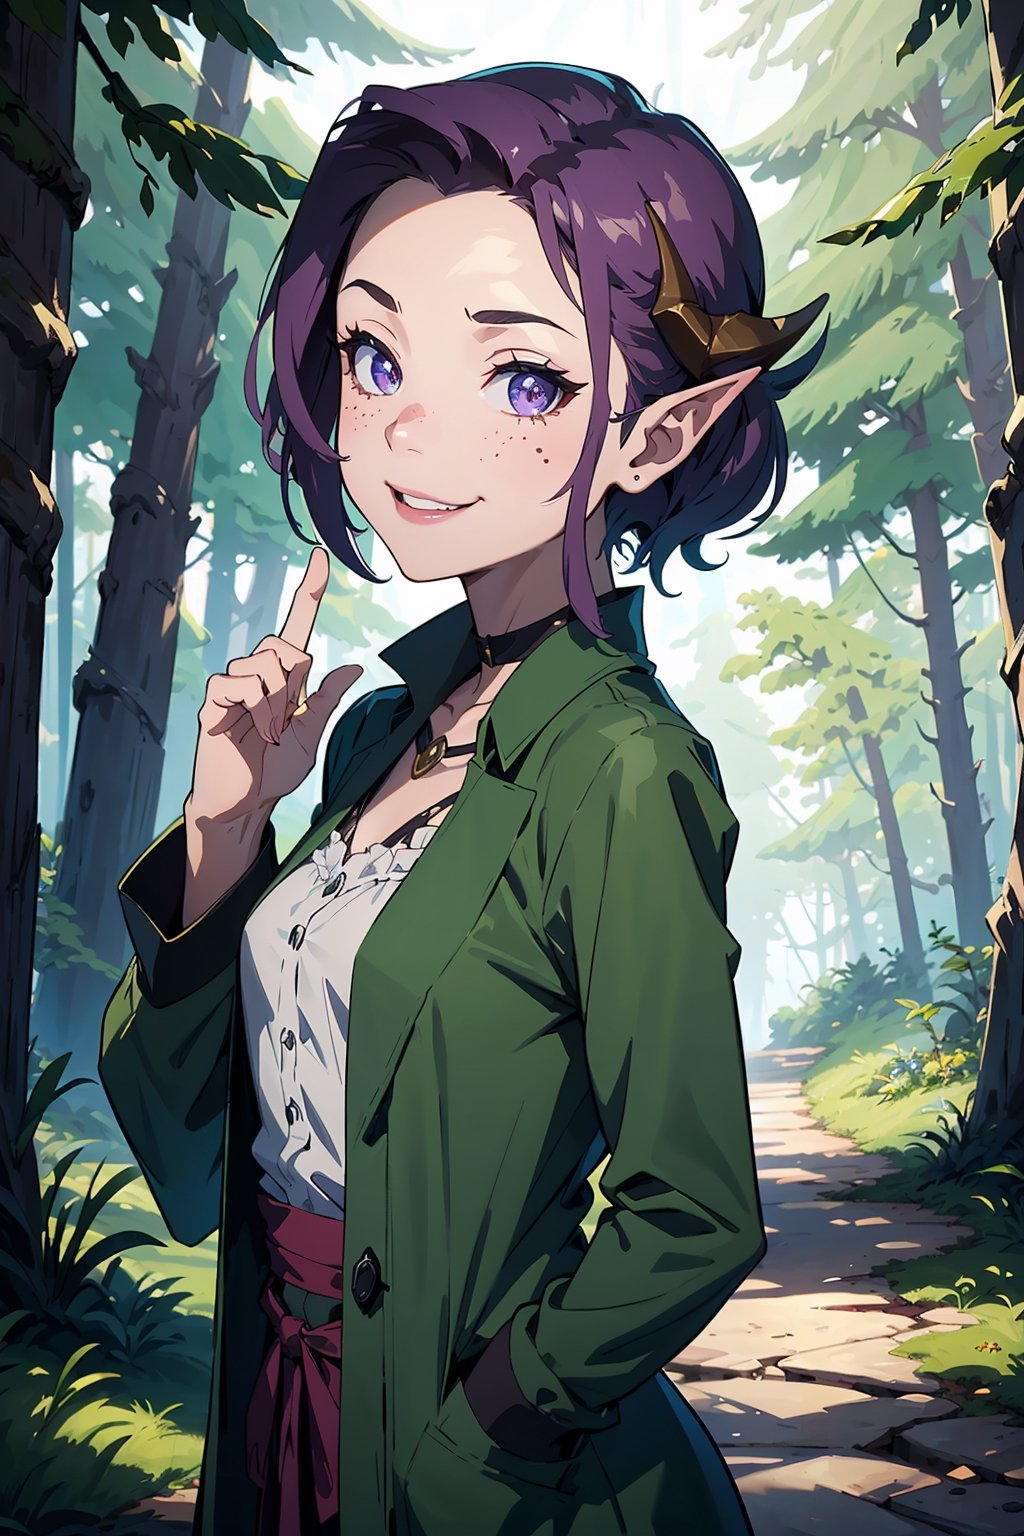 Imagine a female child with short messy bright purple hair in a pixie cut. She has small breasts and is a lolita. Her eyes are a bright shade of green, sparkling with intricate detail and a hit on magic. She has pointed elf ears. She has two short horns on her head. She has an evil smile on her face that shows she's up to no good. She has warm freckles on her face. She wears a long green trench coat with lots of pockets. She is practicing magic that sparkles around her. The background is a charming forest path in the enchanted woods with bright lighting, creating a magical ambiance. This artwork captures the essence of mischief and magic against the backdrop of a beautiful setting. detailed, detail_eyes, detailed_hair, detailed_scenario, detailed_hands, detailed_background, vox machina style,vox machina style,fantai12